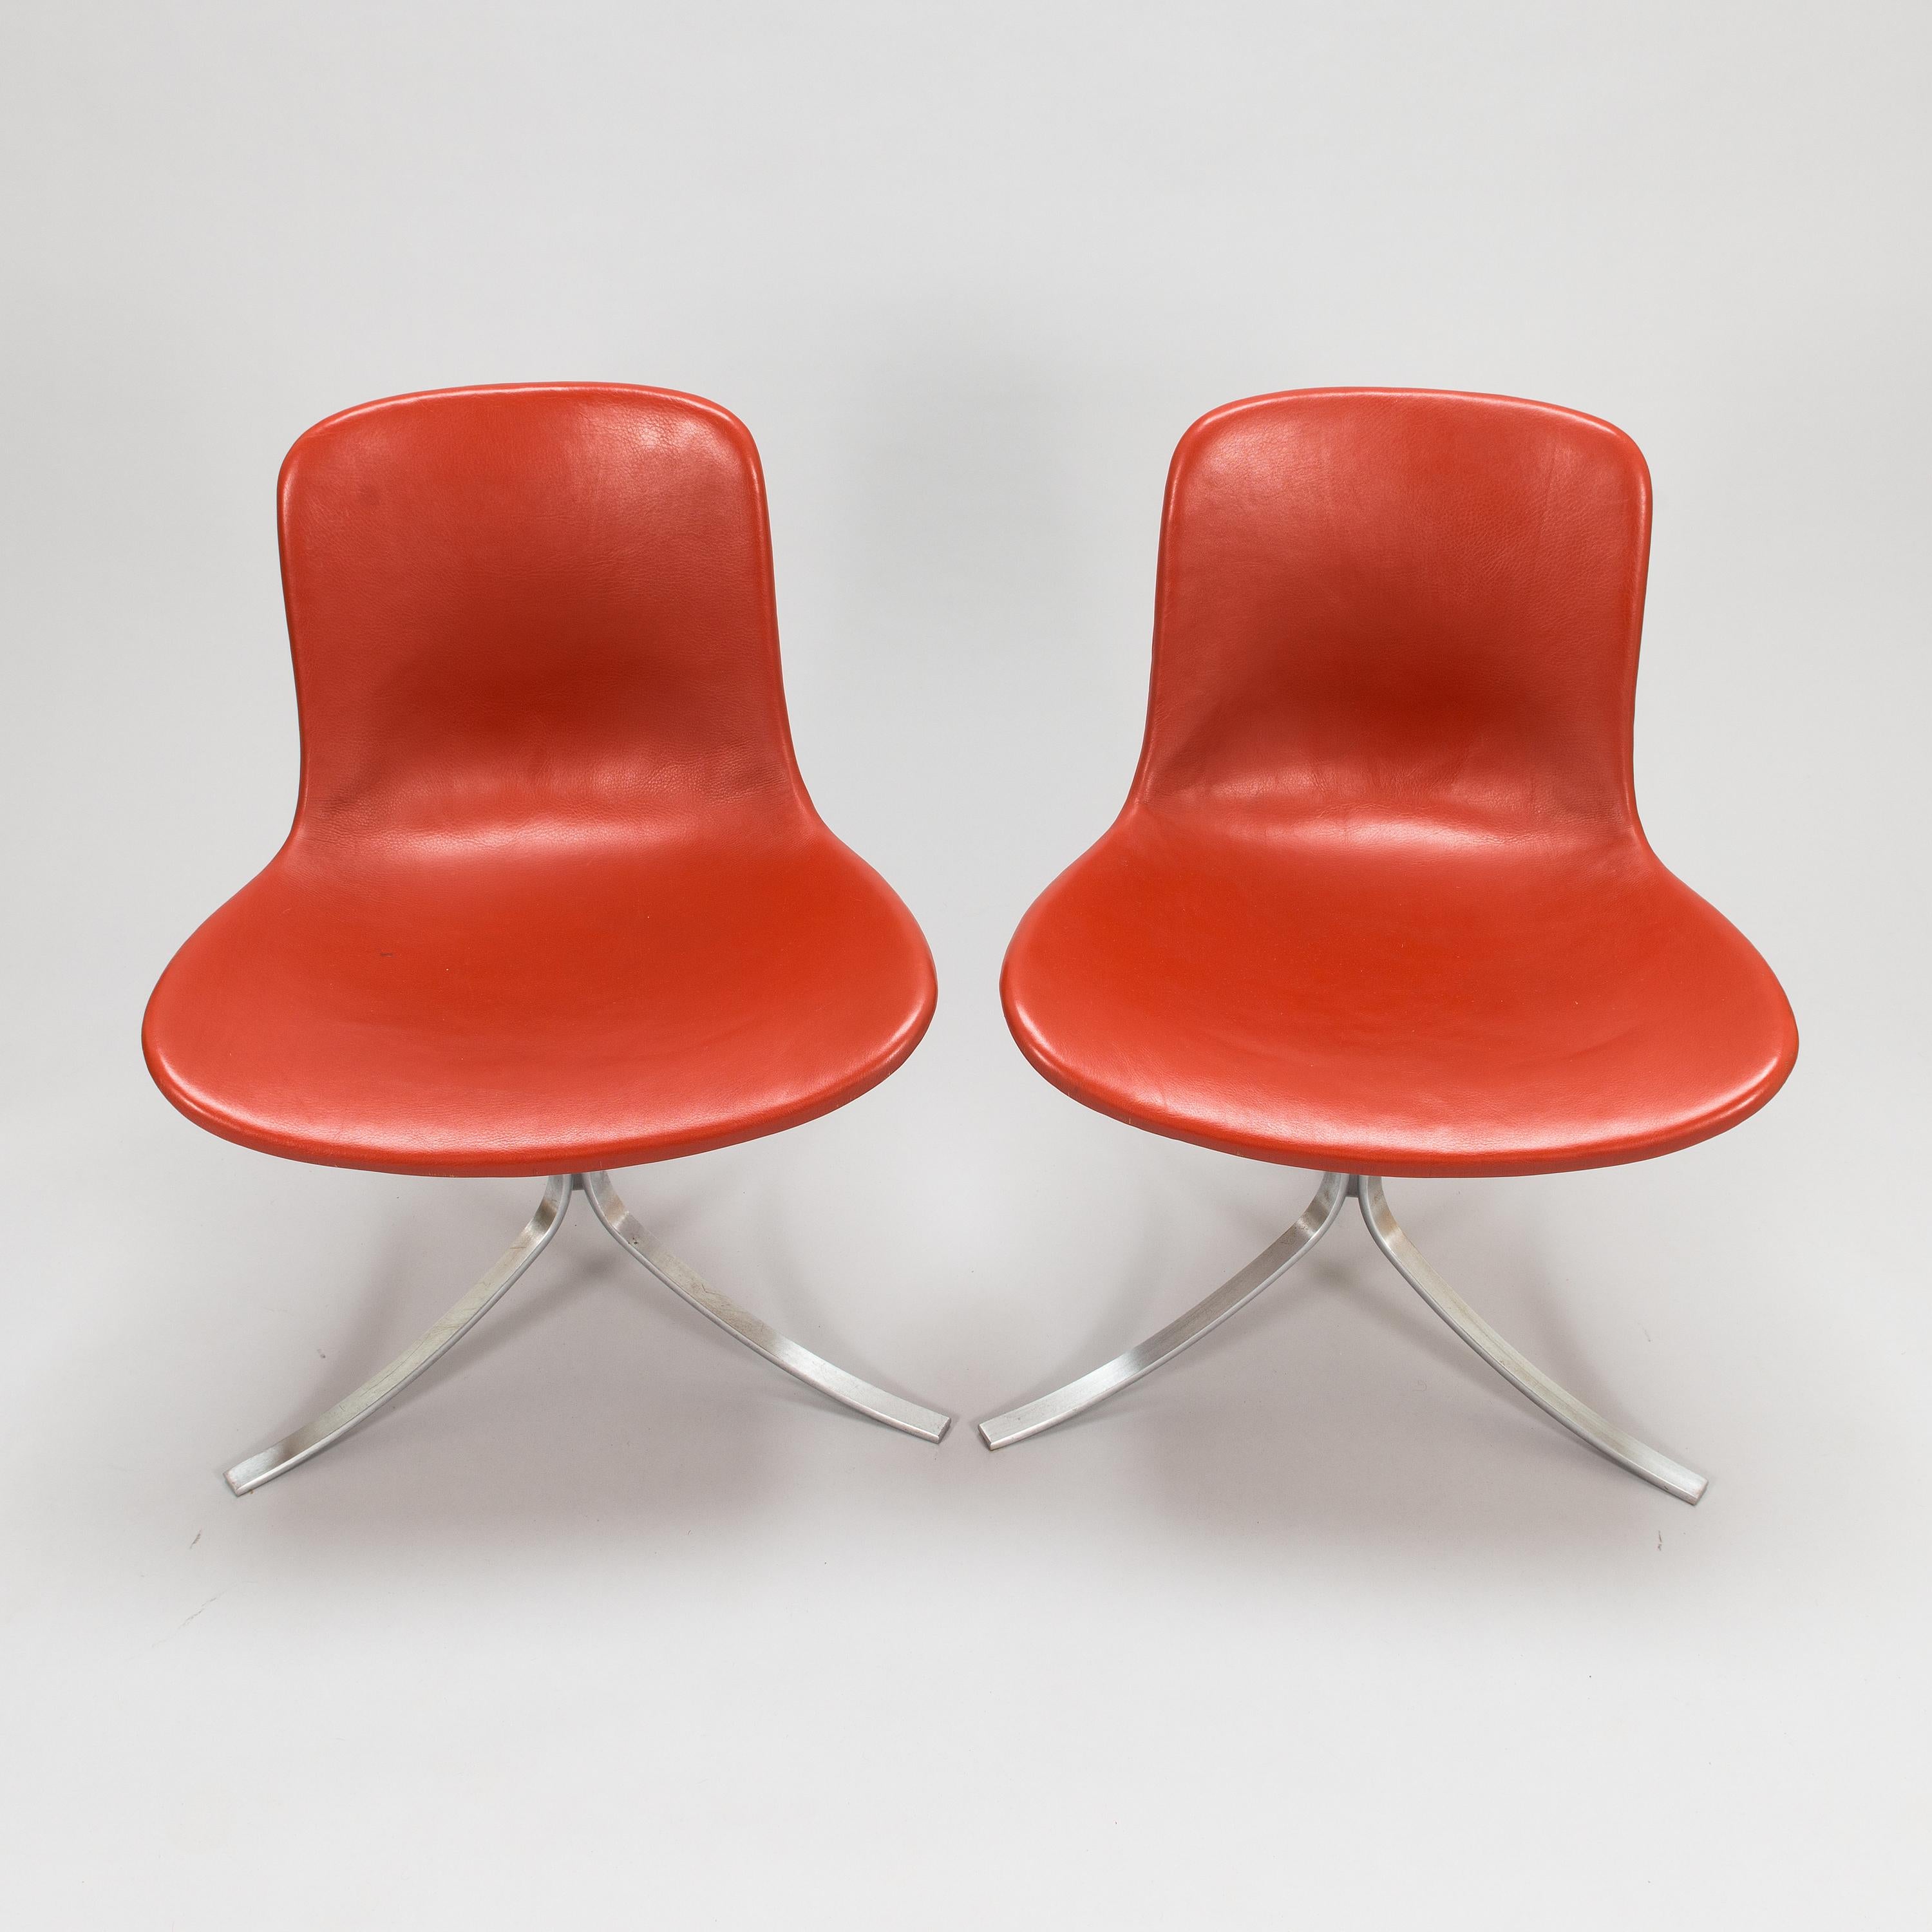 Poul Kjaerholm PK9 Chairs, Vintage Red Leather Upholstered, Set of 6 In Good Condition For Sale In Madrid, ES